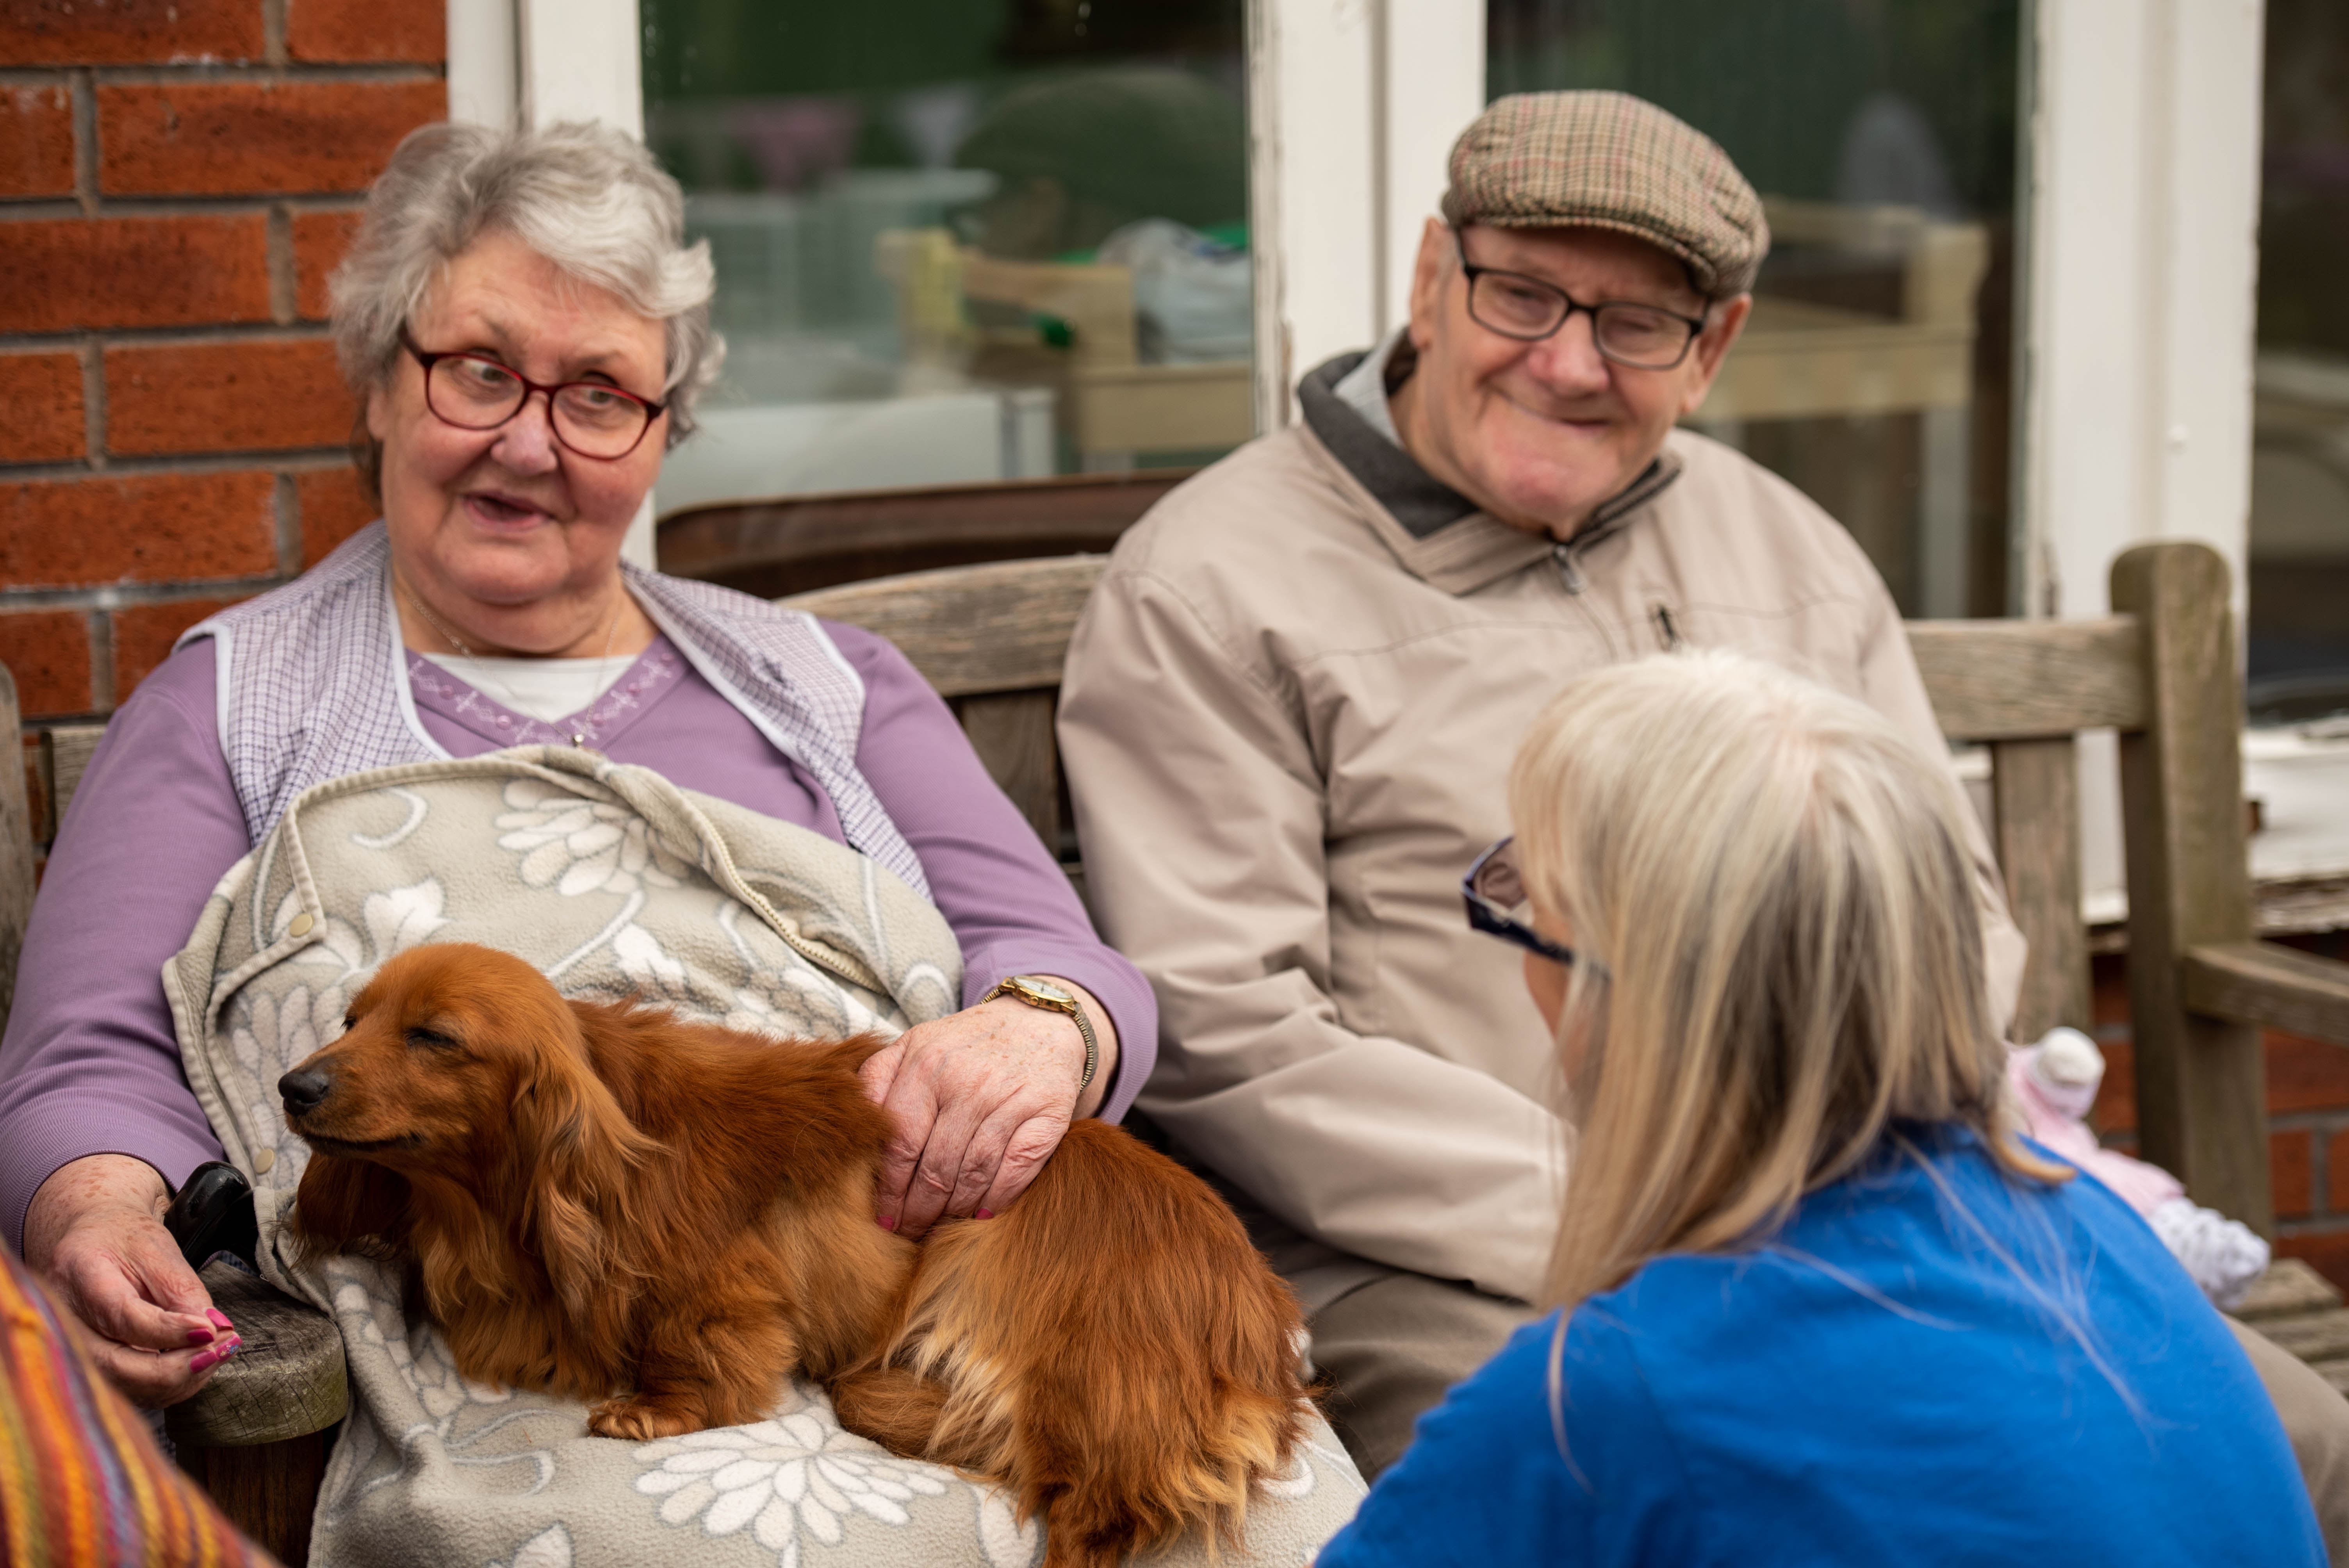 Animal magic is real tonic for care home residents